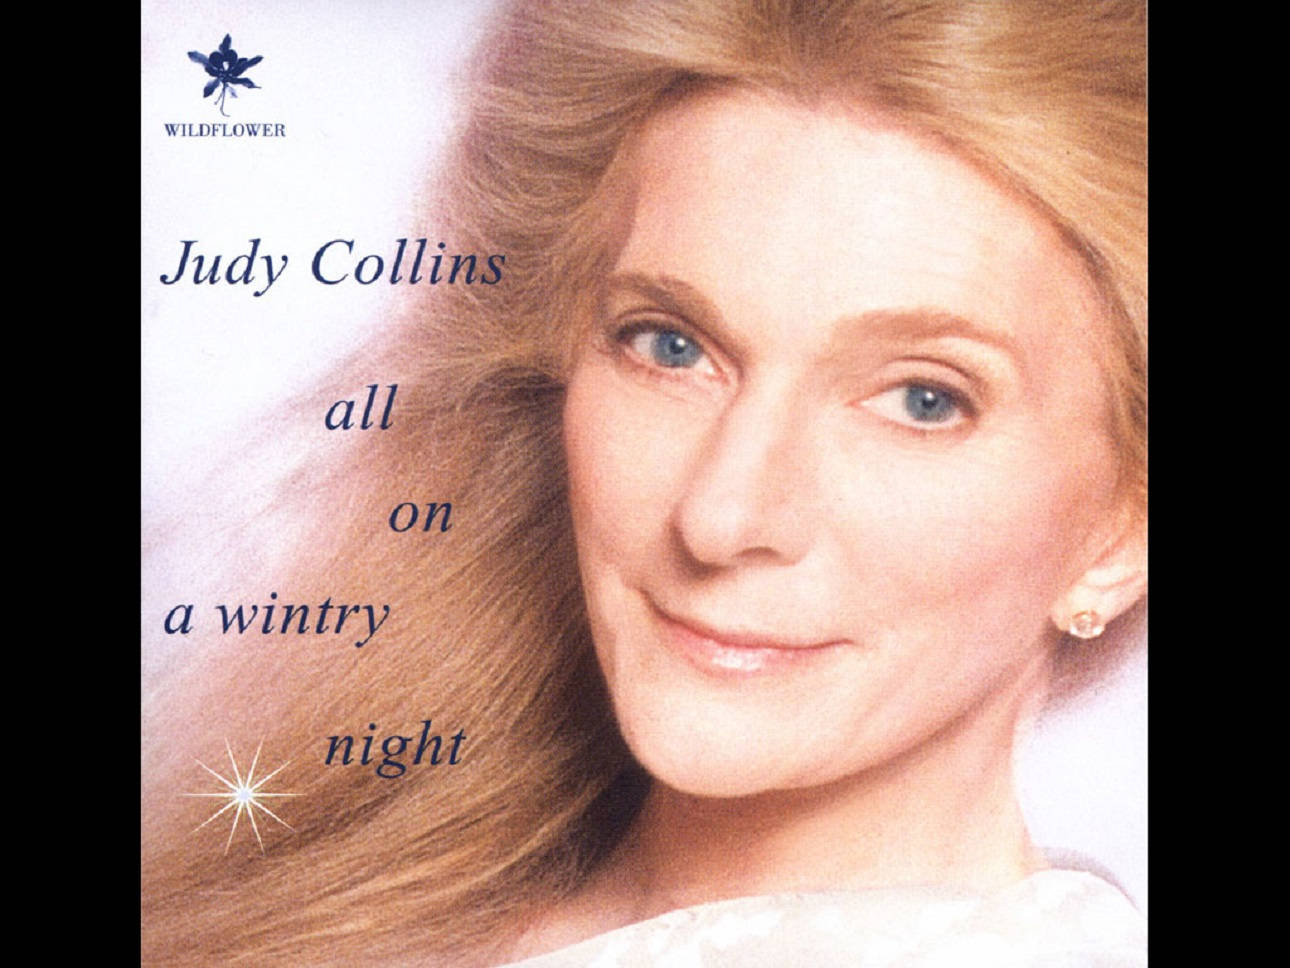 Judycollins Alla På En Vintrig Natt 2000 (this Would Be The Name Of A Potential Music Album Or Song. If Referring To Computer Or Mobile Wallpaper, The Sentence Doesn't Really Make Sense And More Context Would Be Needed To Provide An Accurate Translation.) Wallpaper